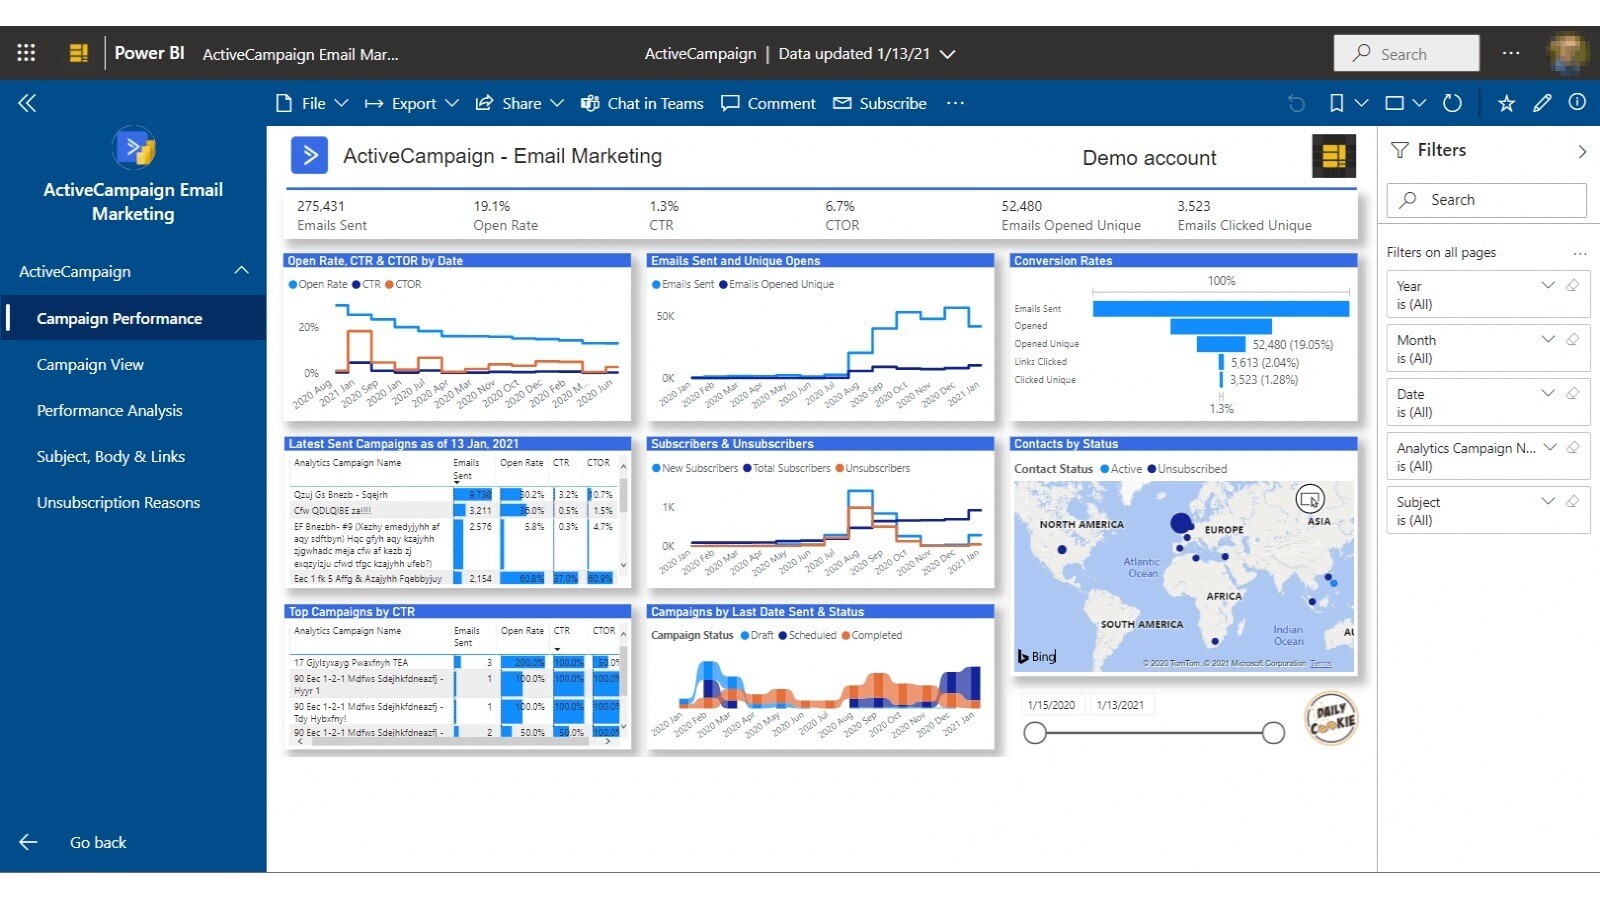 ActiveCampaign displays data about campaign performance, including open rate, subscriber numbers, and emails sent